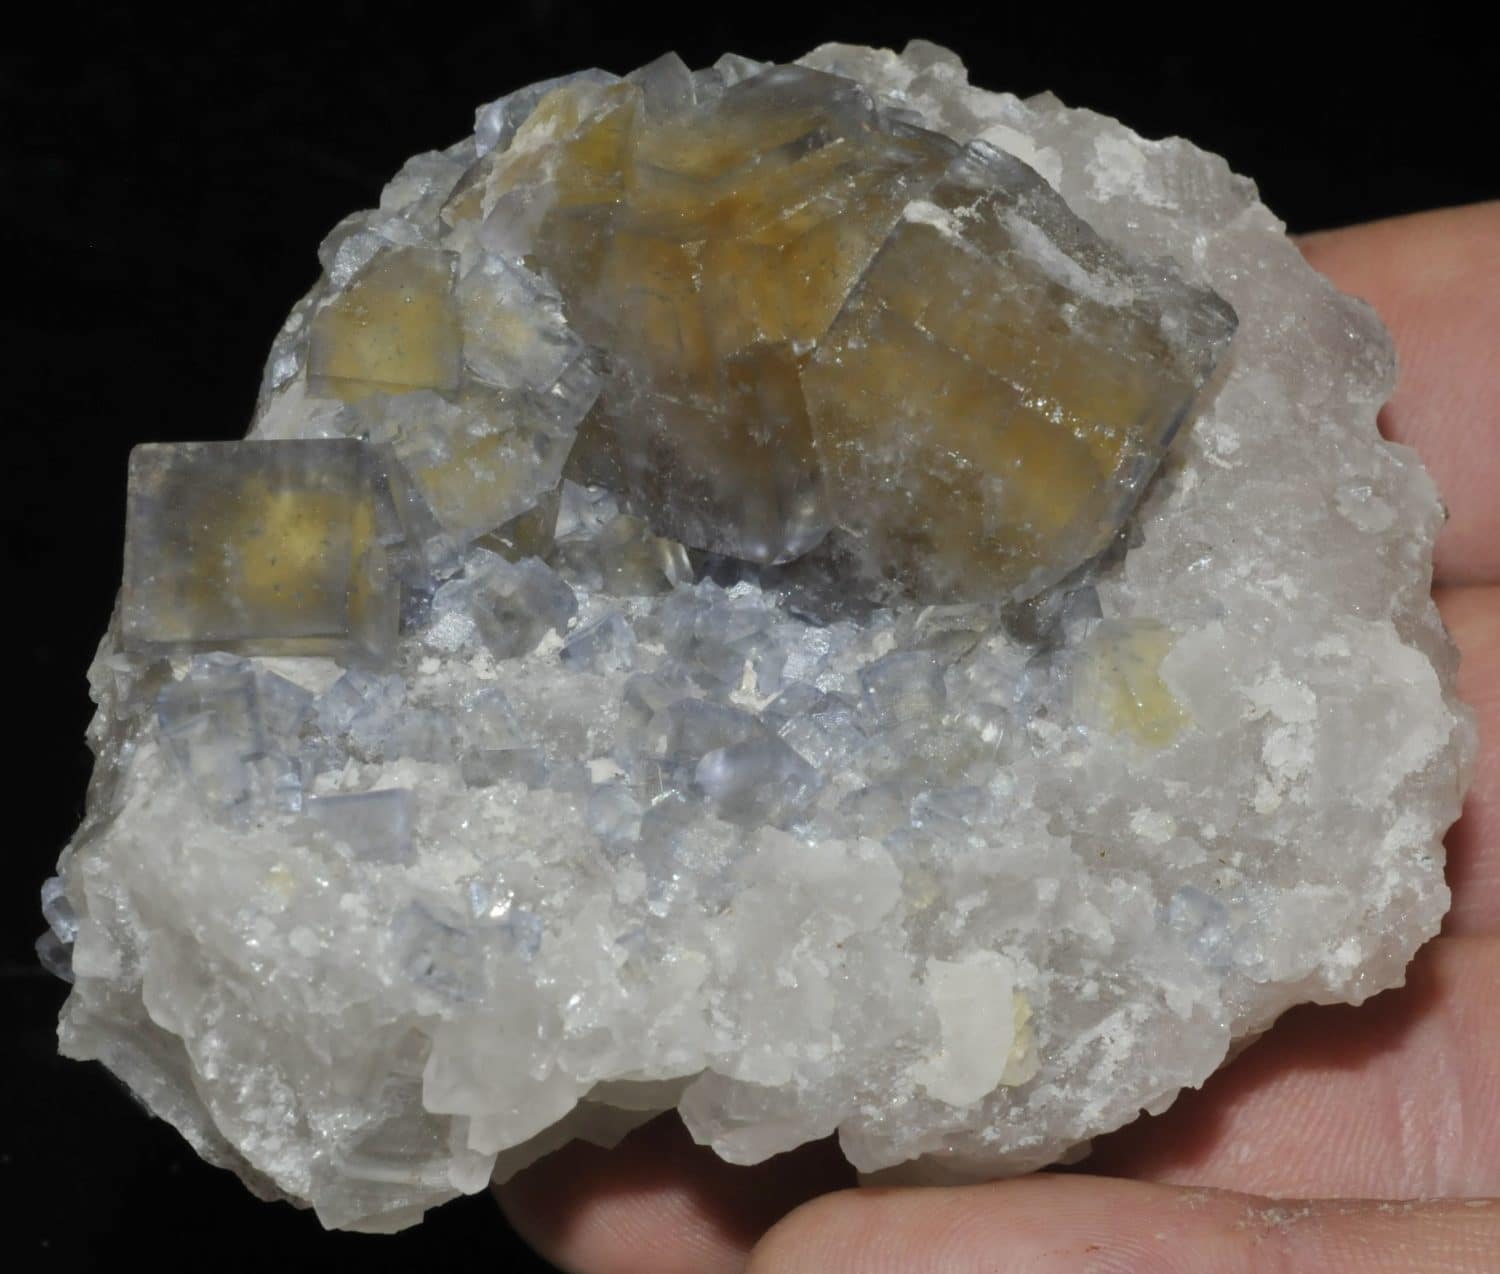 Fluorite crystals with phantoms from the mine of the Burc (Burg, Tarn, France)